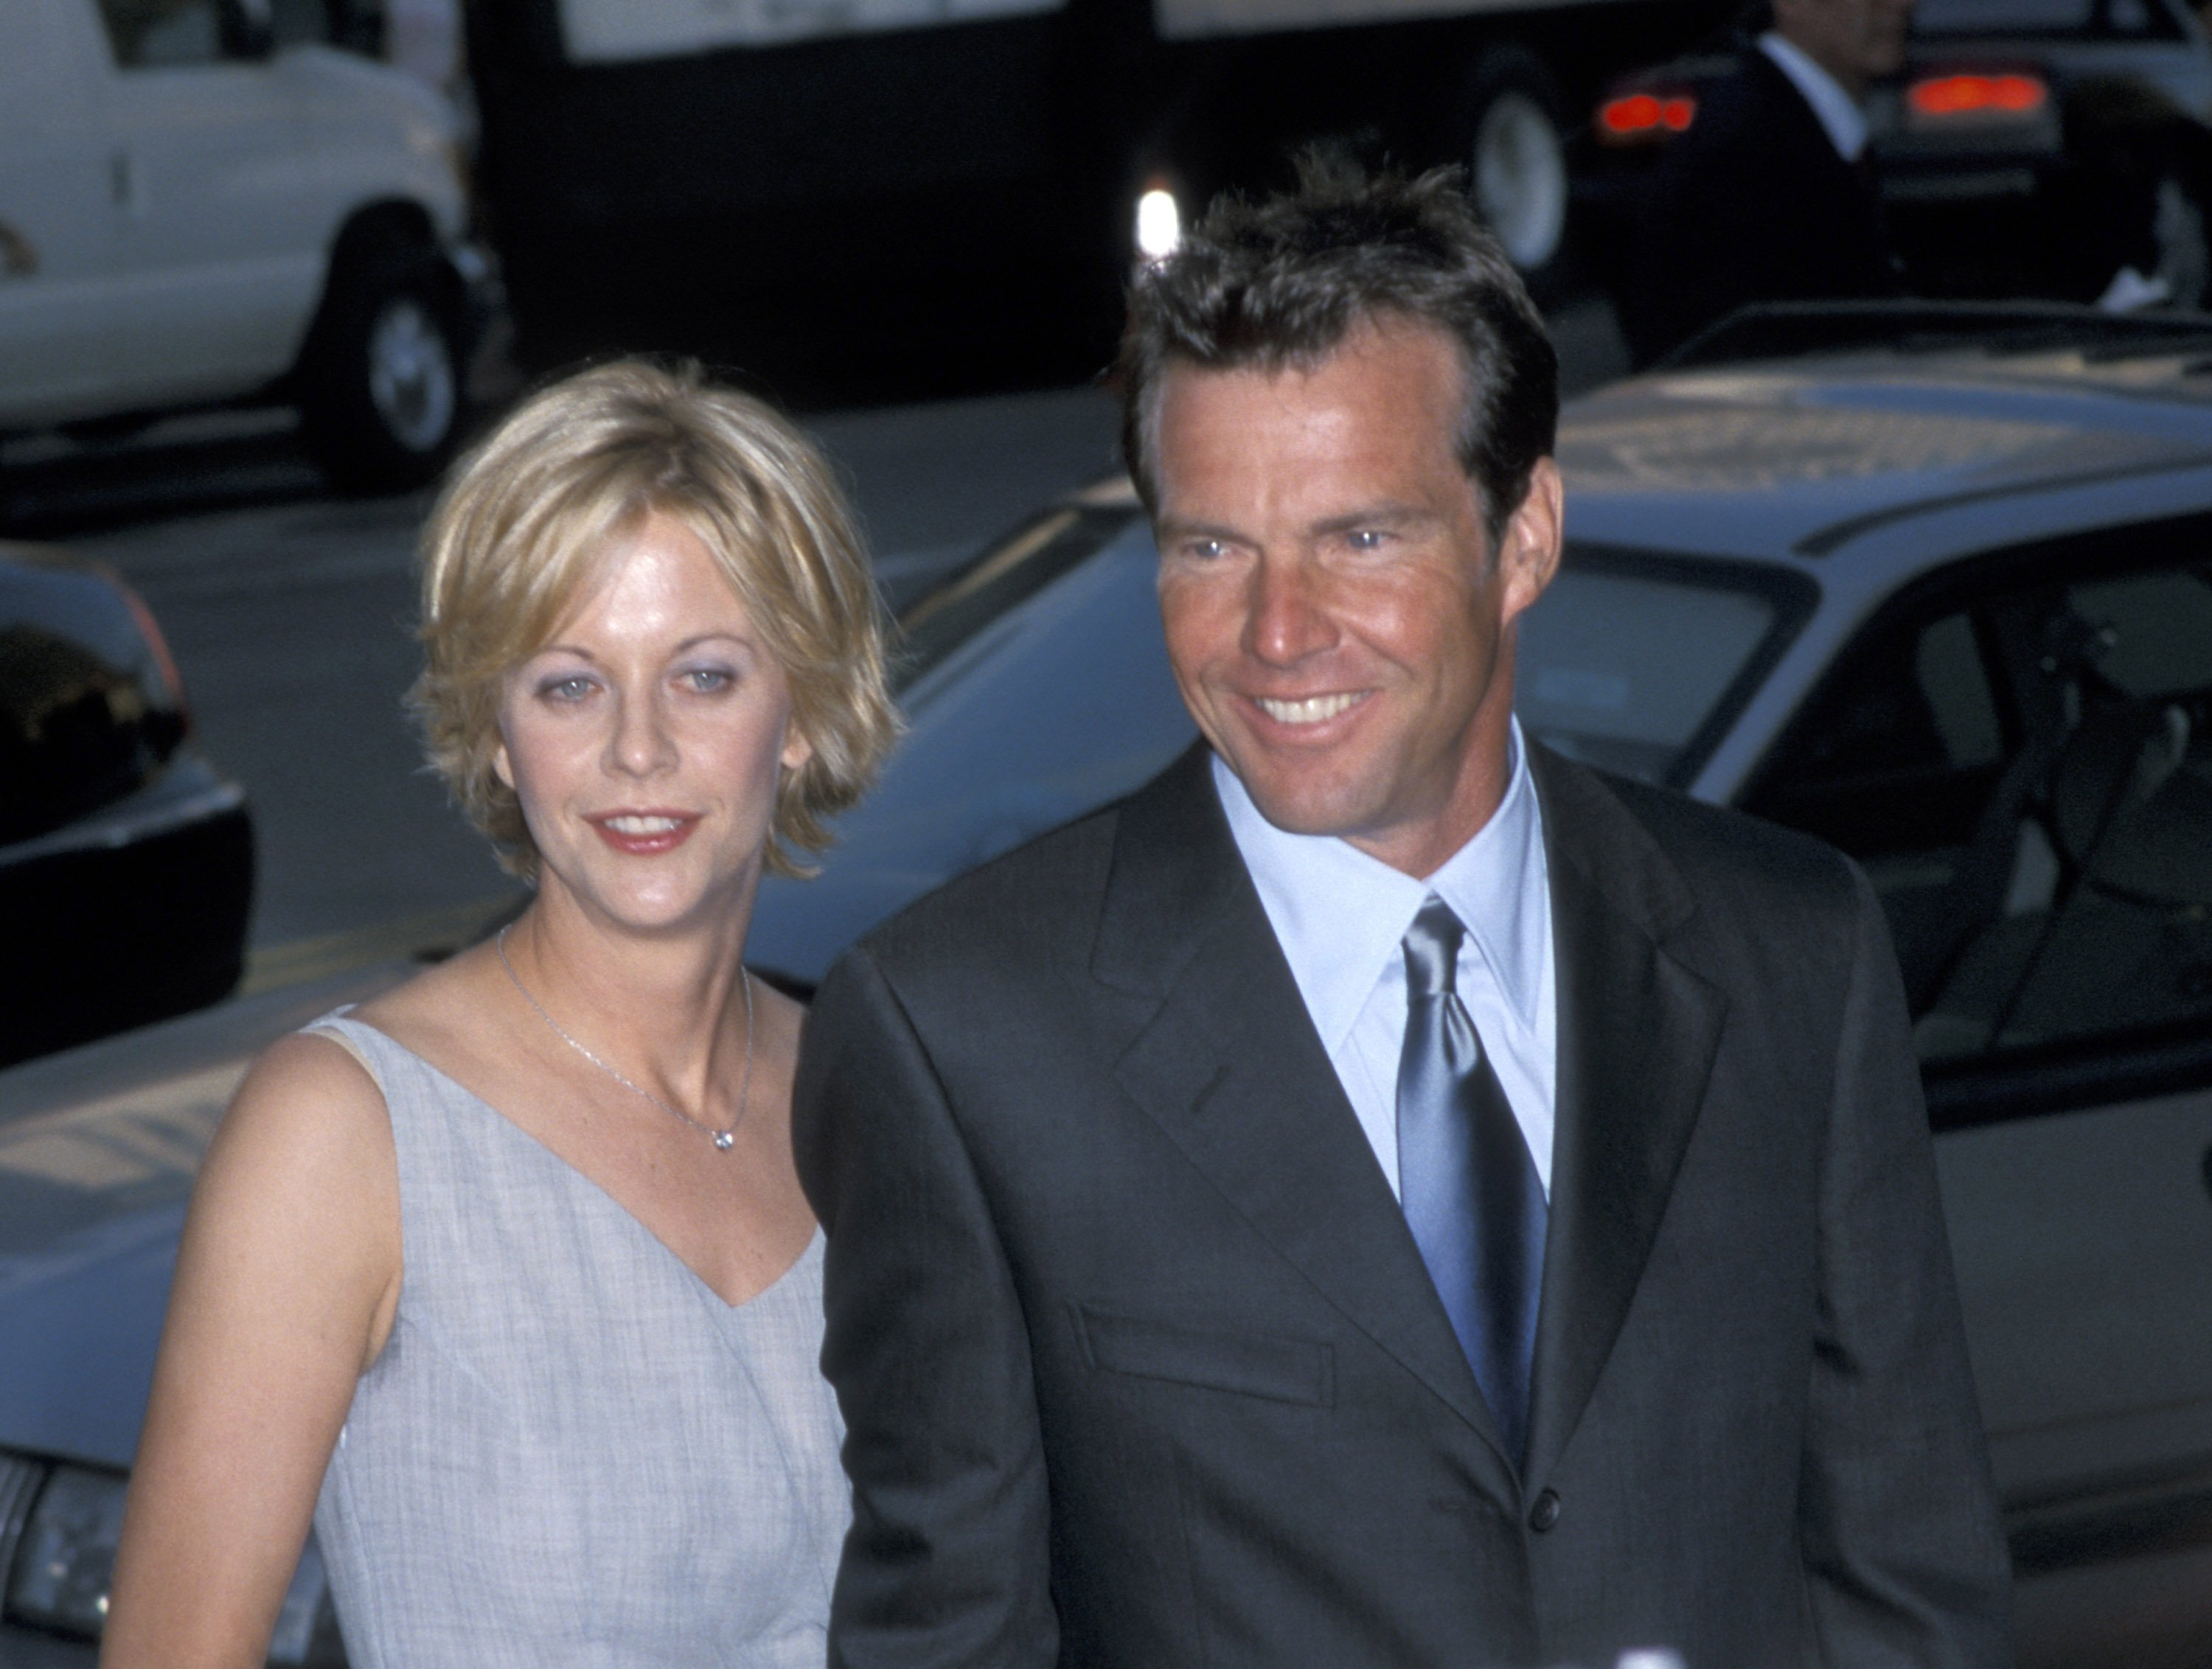 Meg Ryan and Dennis Quaid at the Los Angeles premiere of "The Parent Trap" on July 2, 1998 | Source: Getty Images